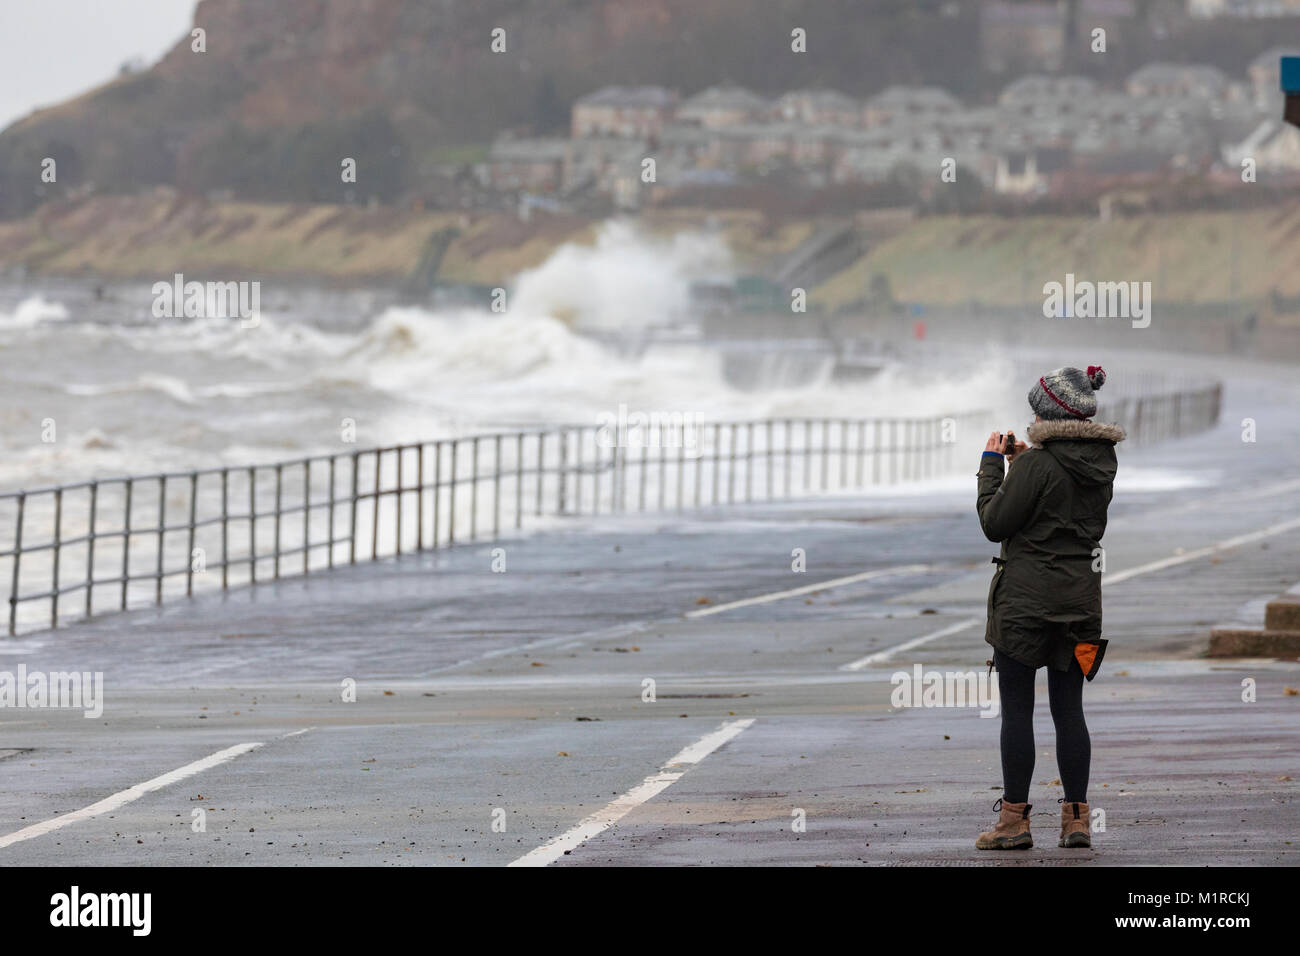 Colwyn Bay, Conwy County, Wales, UK 1st February 2018, UK Weather: Cold weather with high tide and windy weather have provided ideal conditions for Natural Resources Wales to provide flood warnings for the North Wales Coast including Colwyn Bay. A person taking a photograph of the hugh waves along the promenade at Colwyn Bay as huge waves batter the coastal resort with flood warnings in place, Conwy County, Wales Â© DGDImages/Alamy Live News Stock Photo